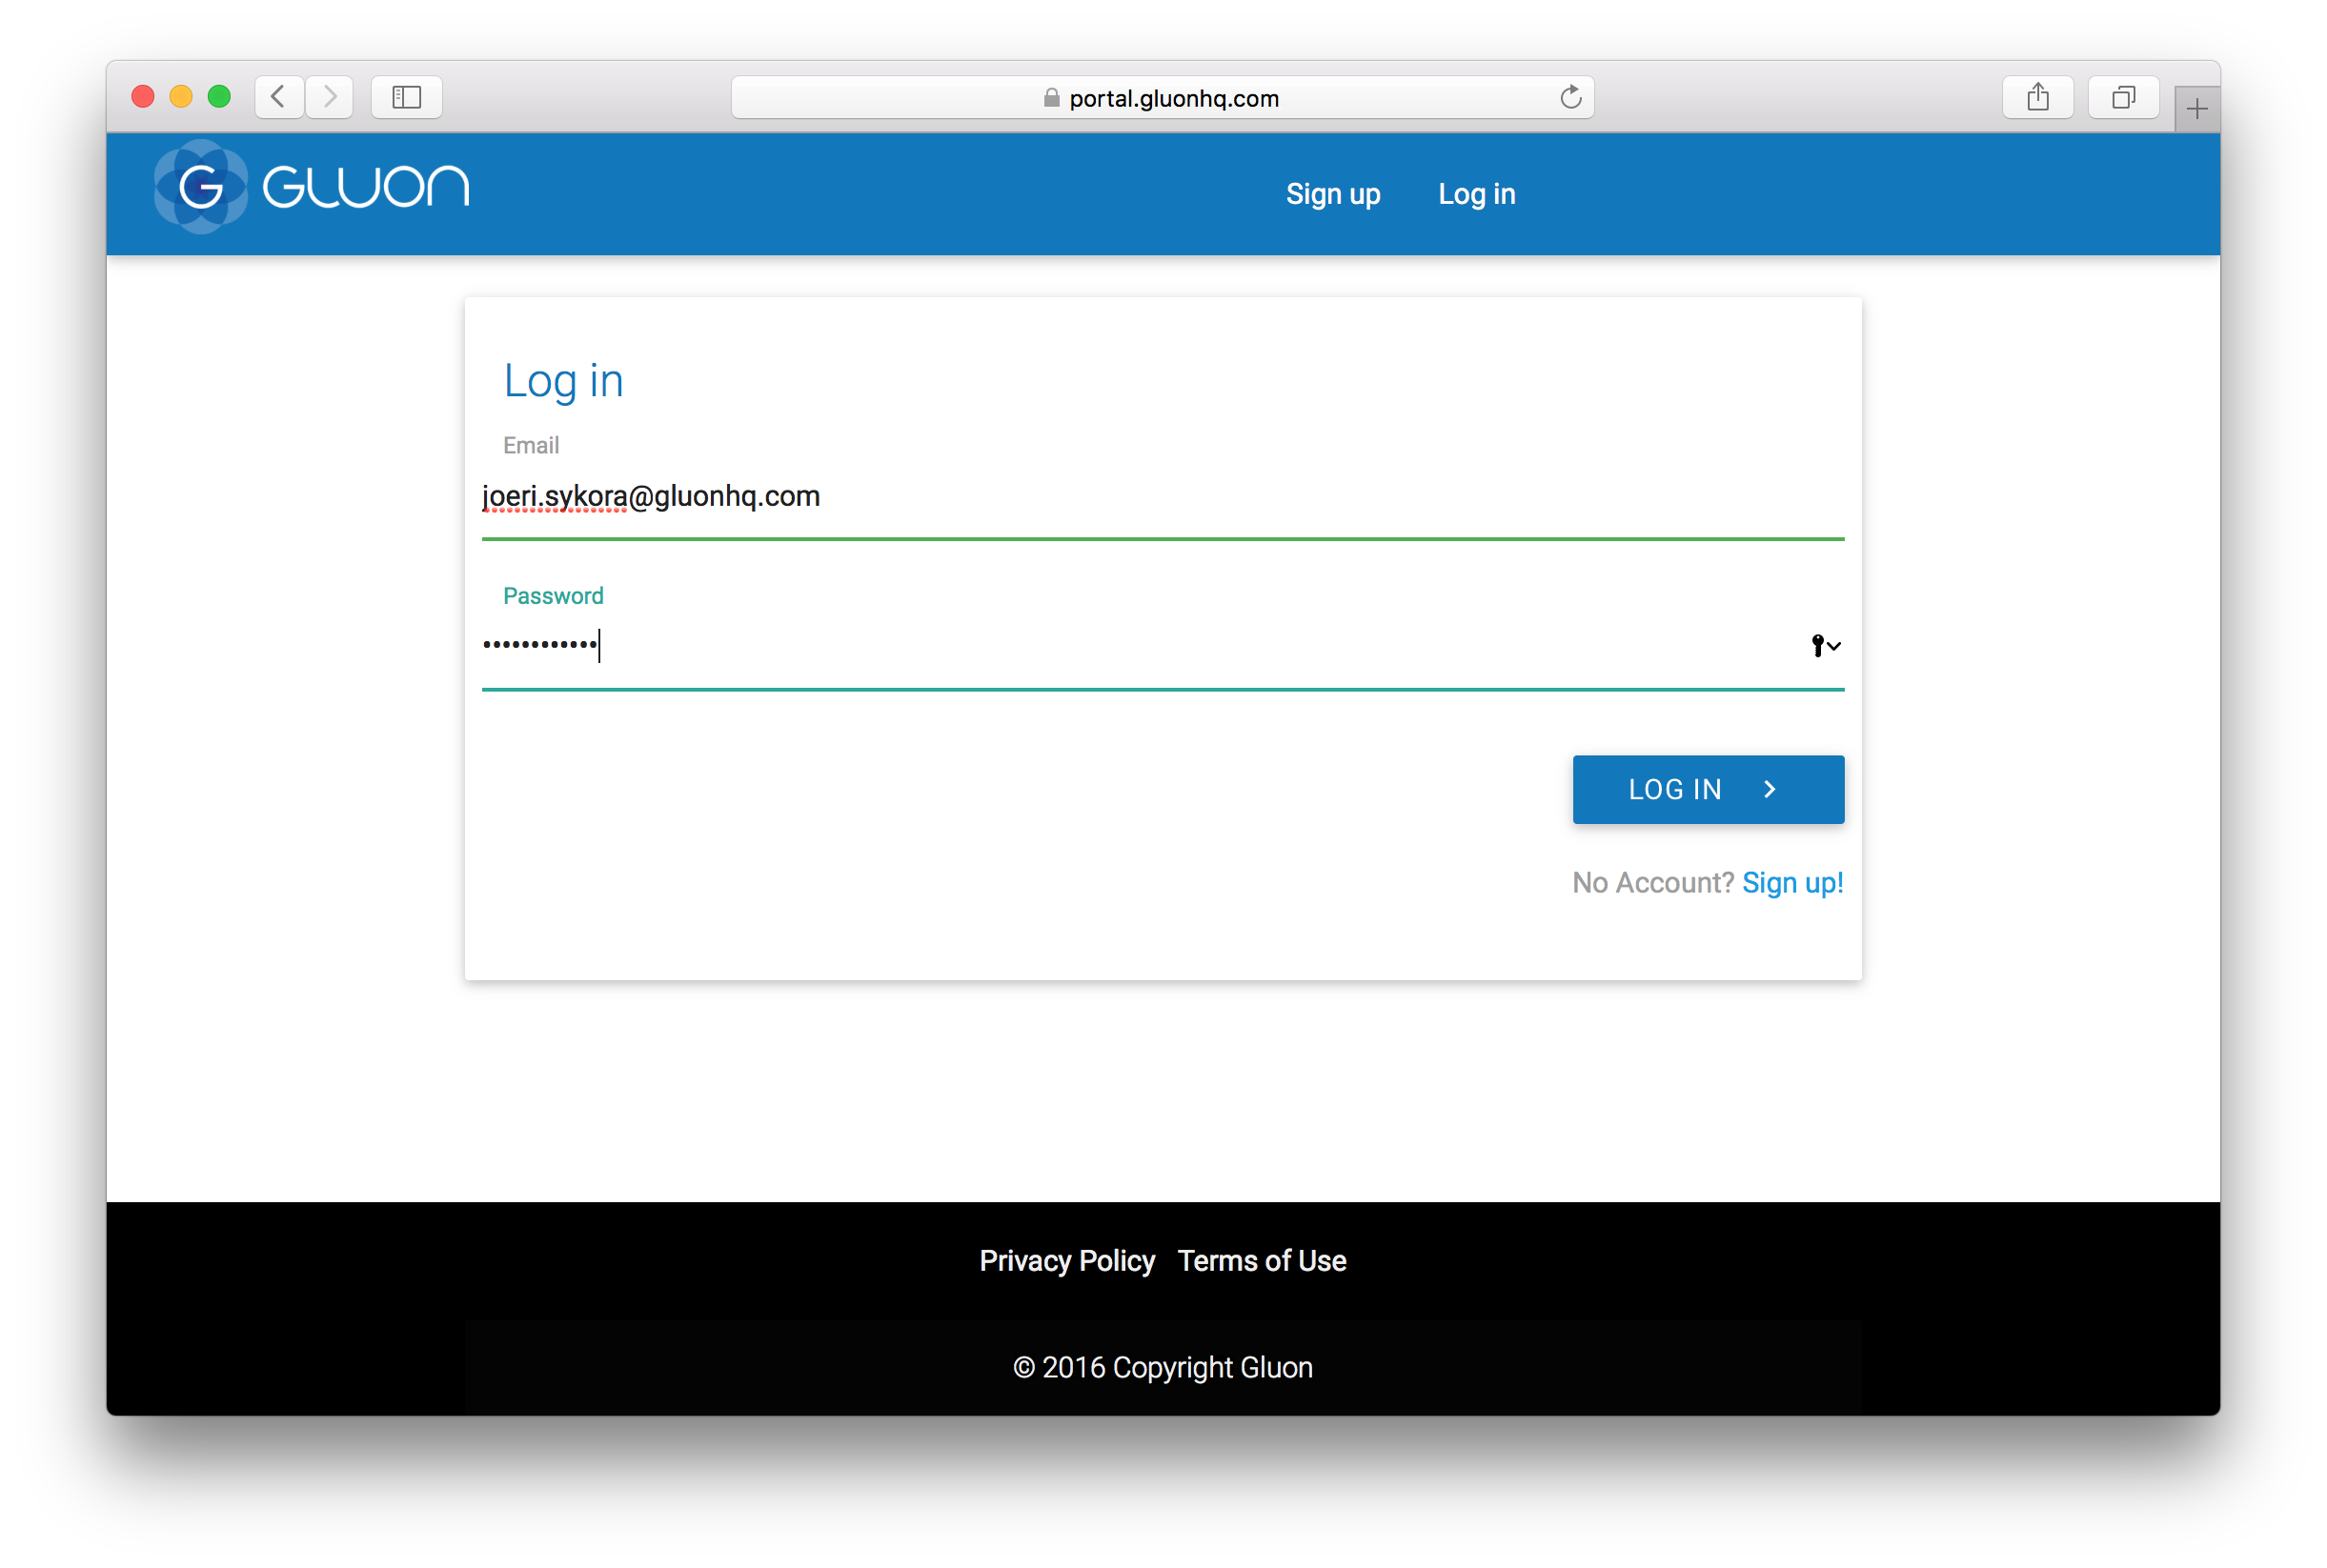 Log in to Gluon CloudLink Portal